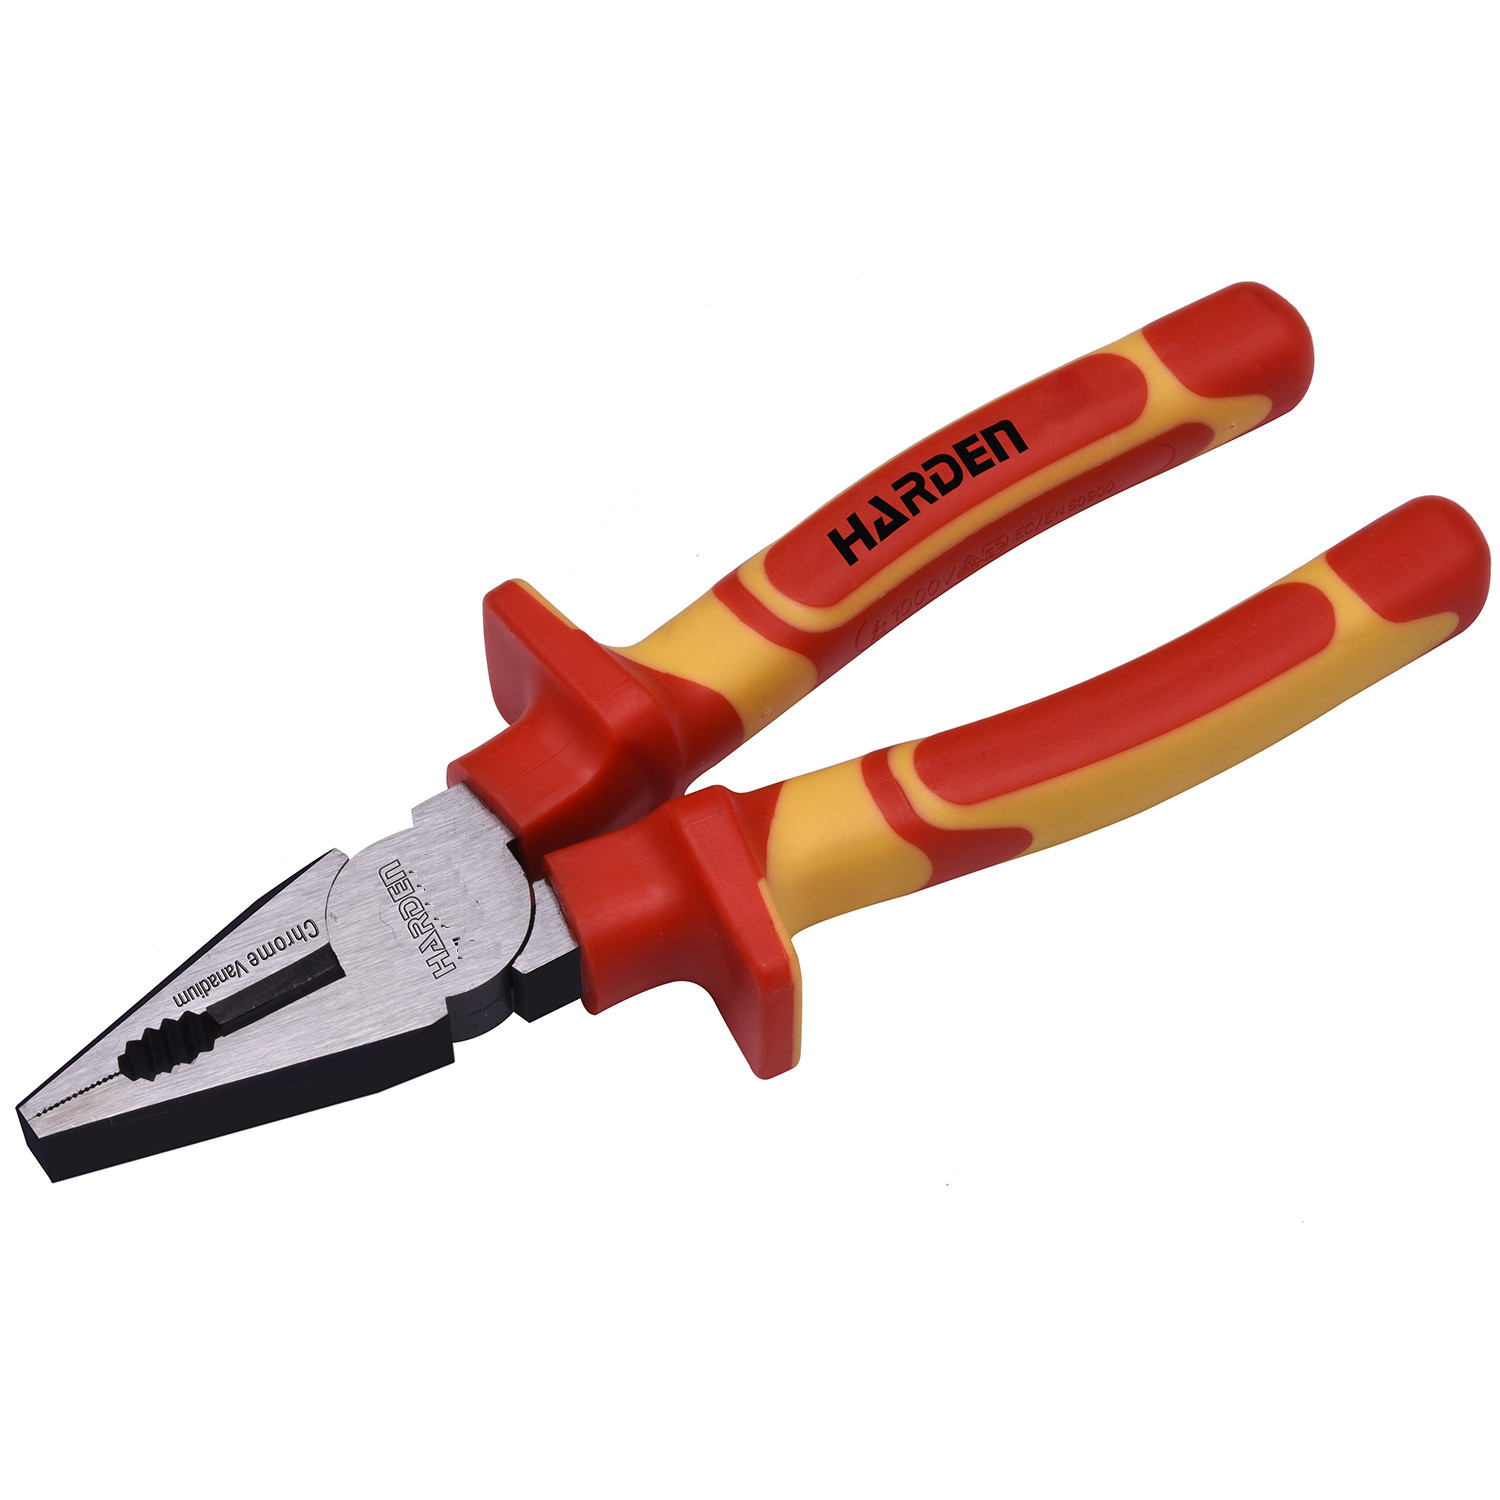 800138- Harden 8” Insulated combination pliers